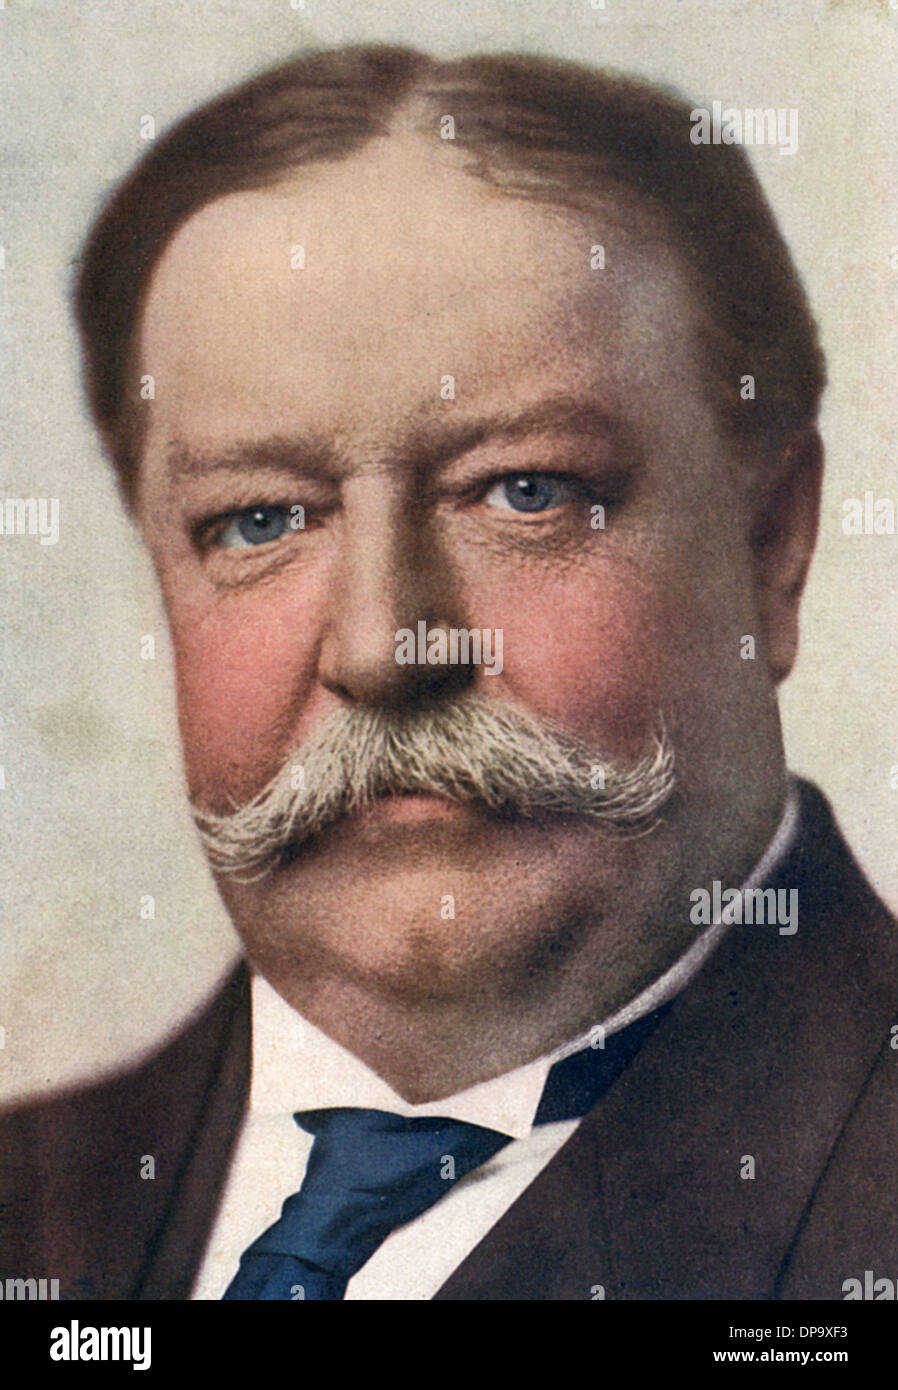 William Howard Taft 27th President of the United States New 5x7 Photo